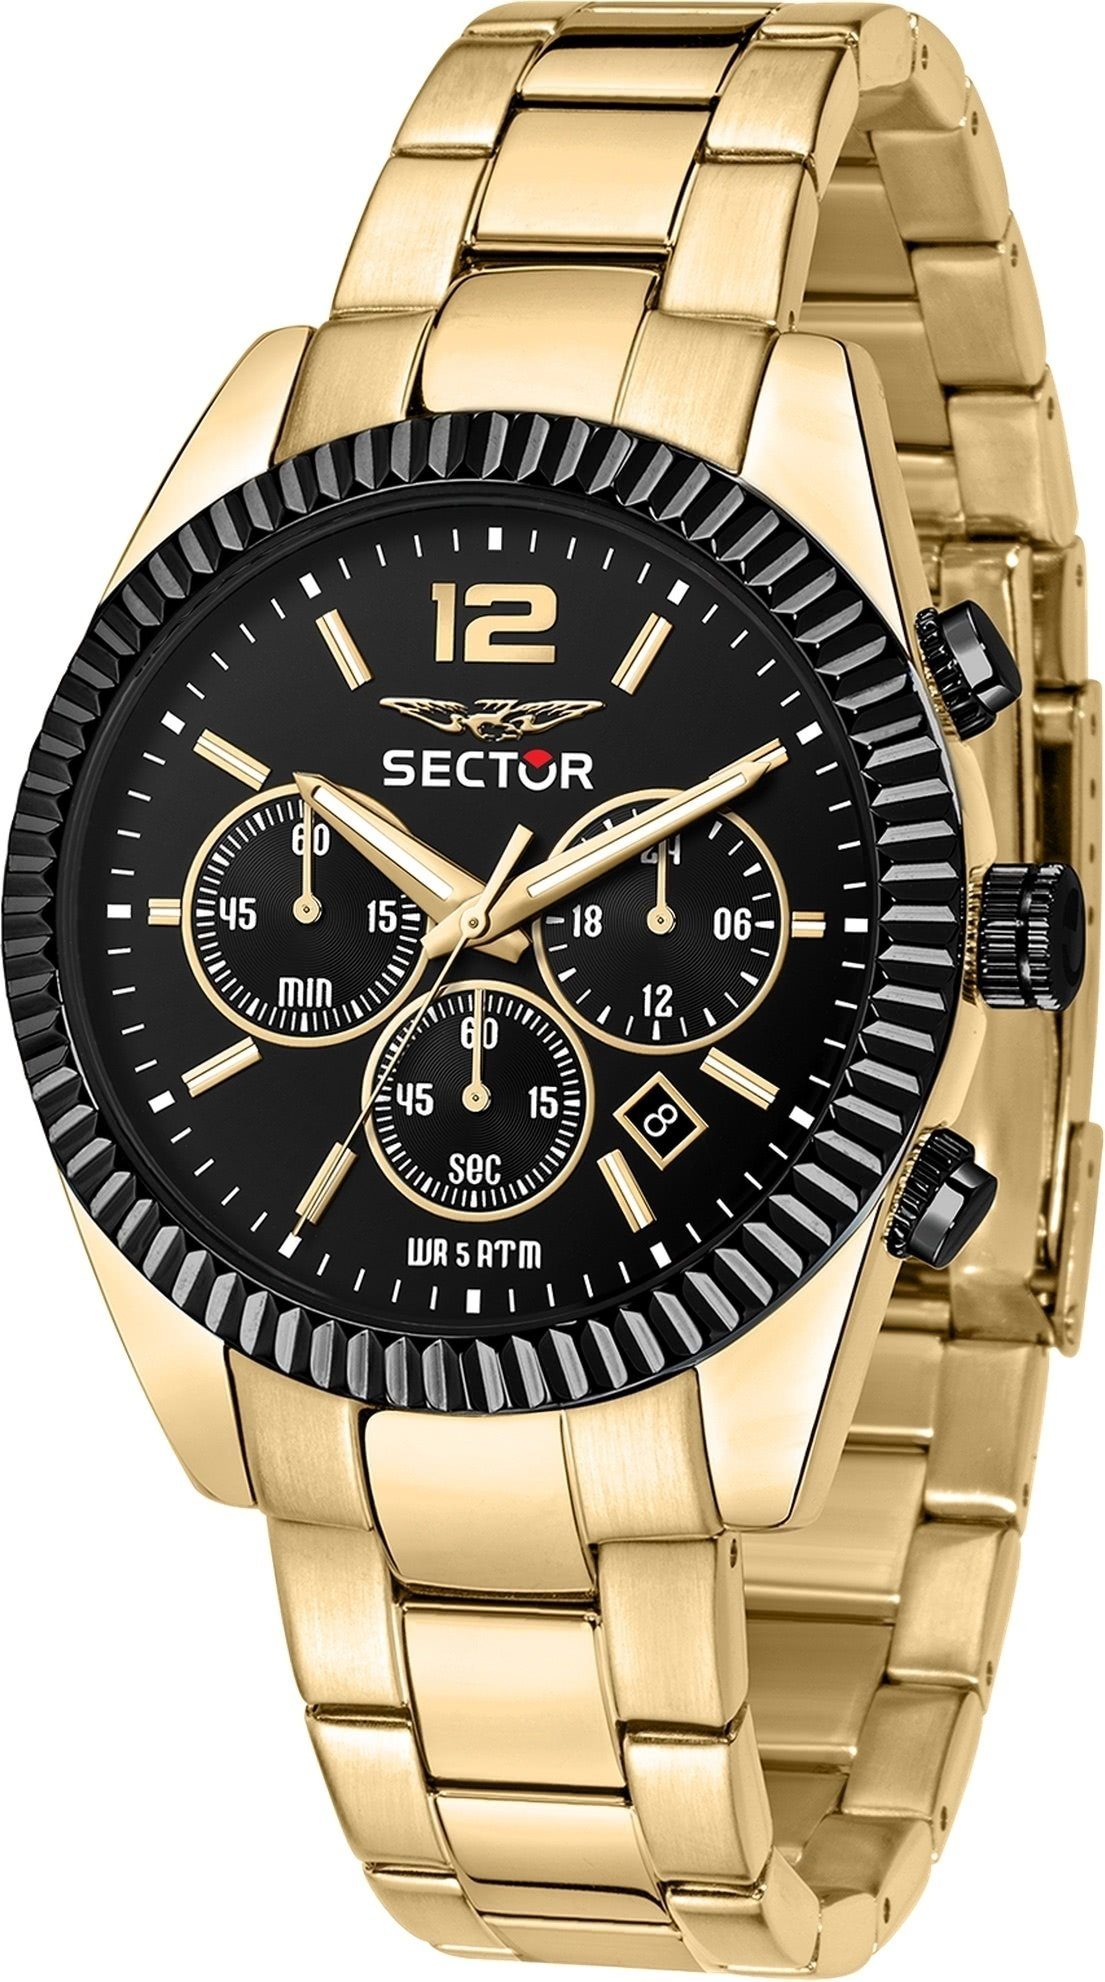 Sector No Limits Sector Chronograph Sector Herren Armbanduhr Chrono, Herren Armbanduhr rund, groß (45mm), Edelstahlarmband gold, Fashion